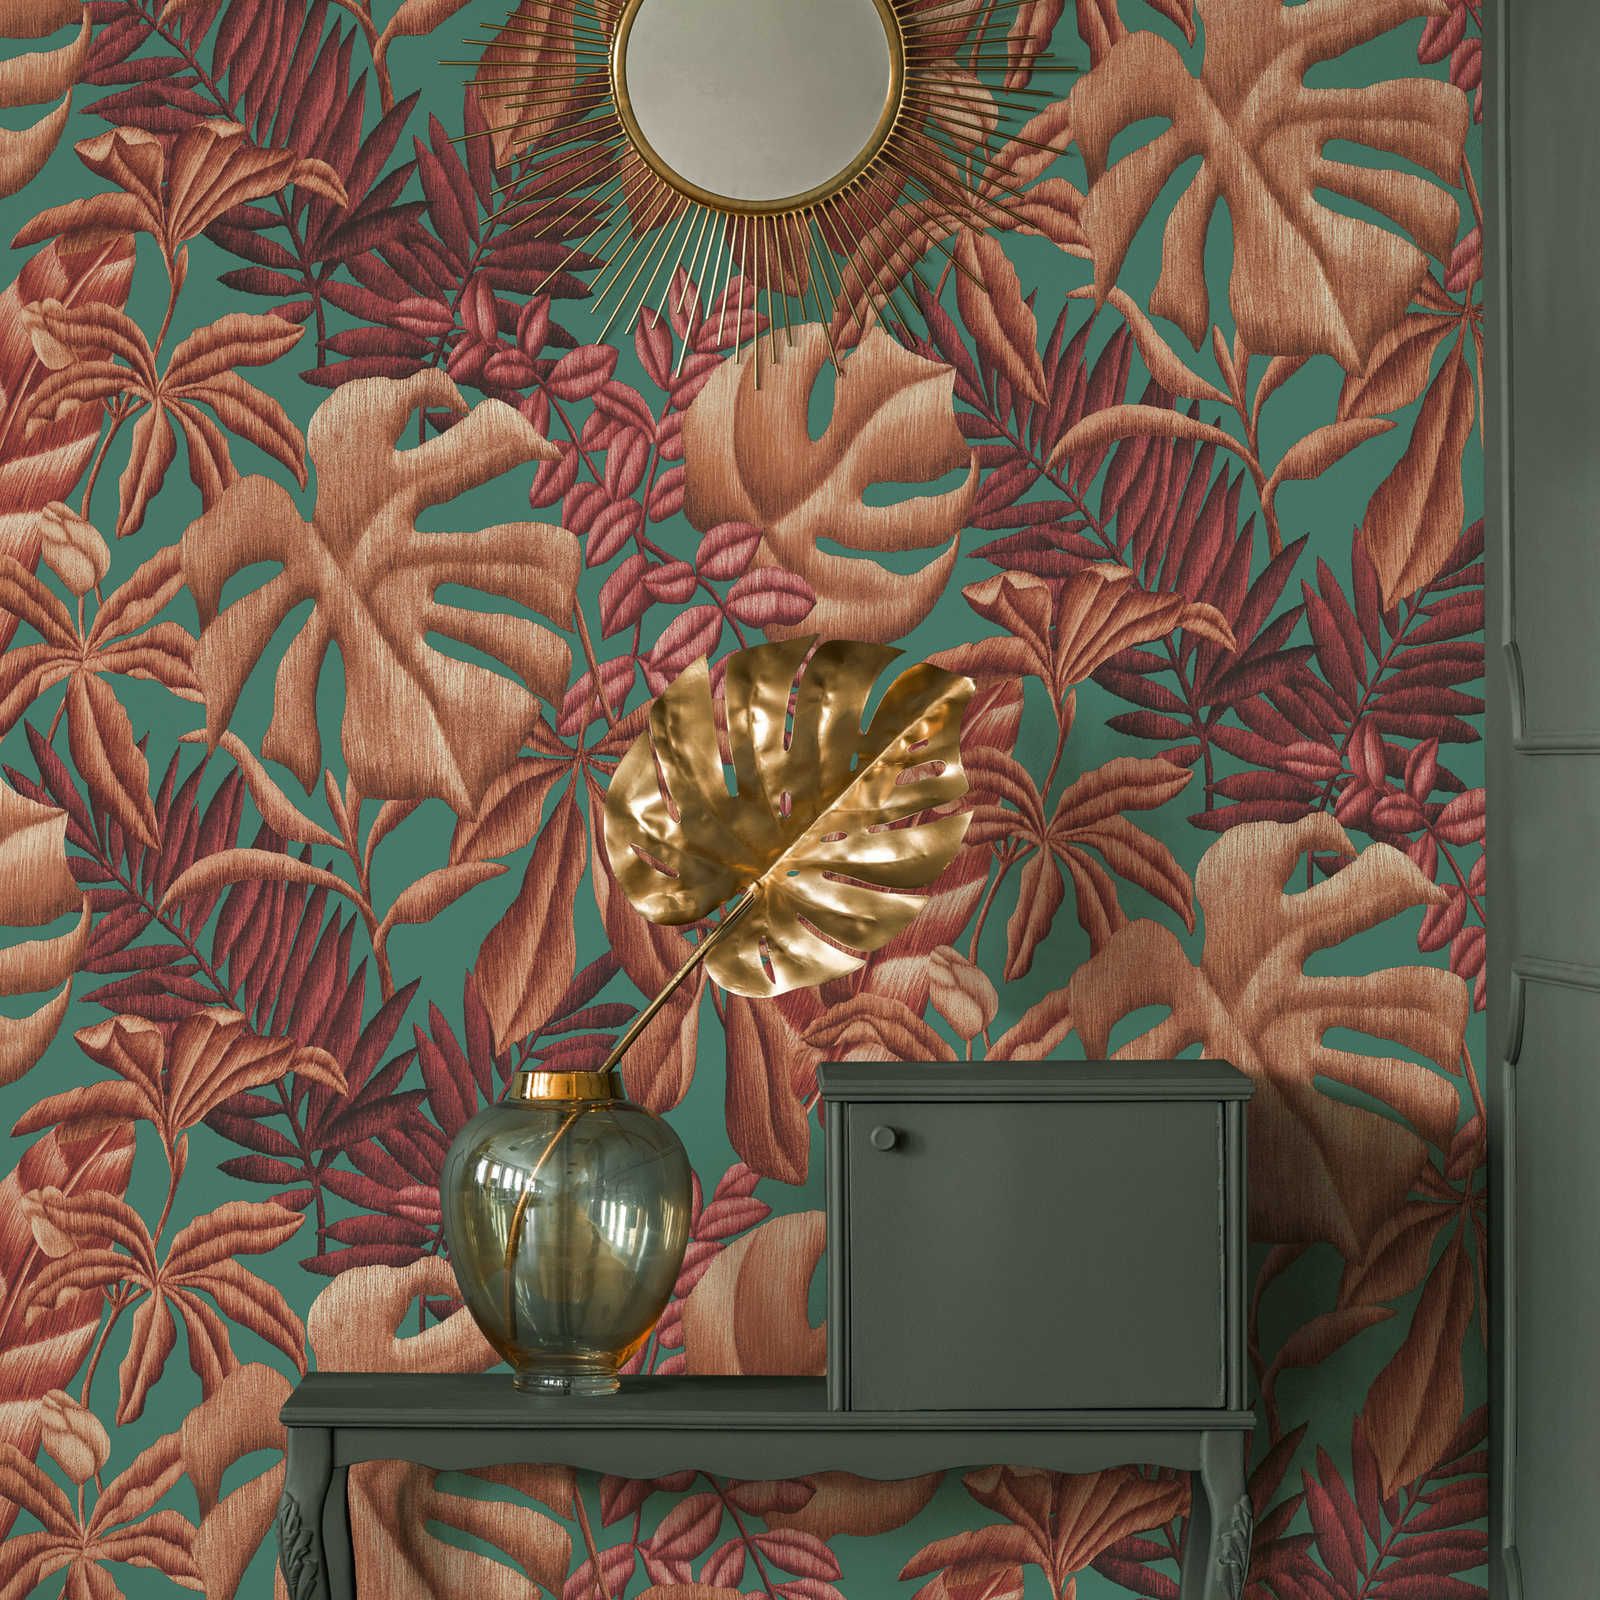 Wallpaper with large-scale leaf pattern fern & banana leaves - red, orange, turquoise
